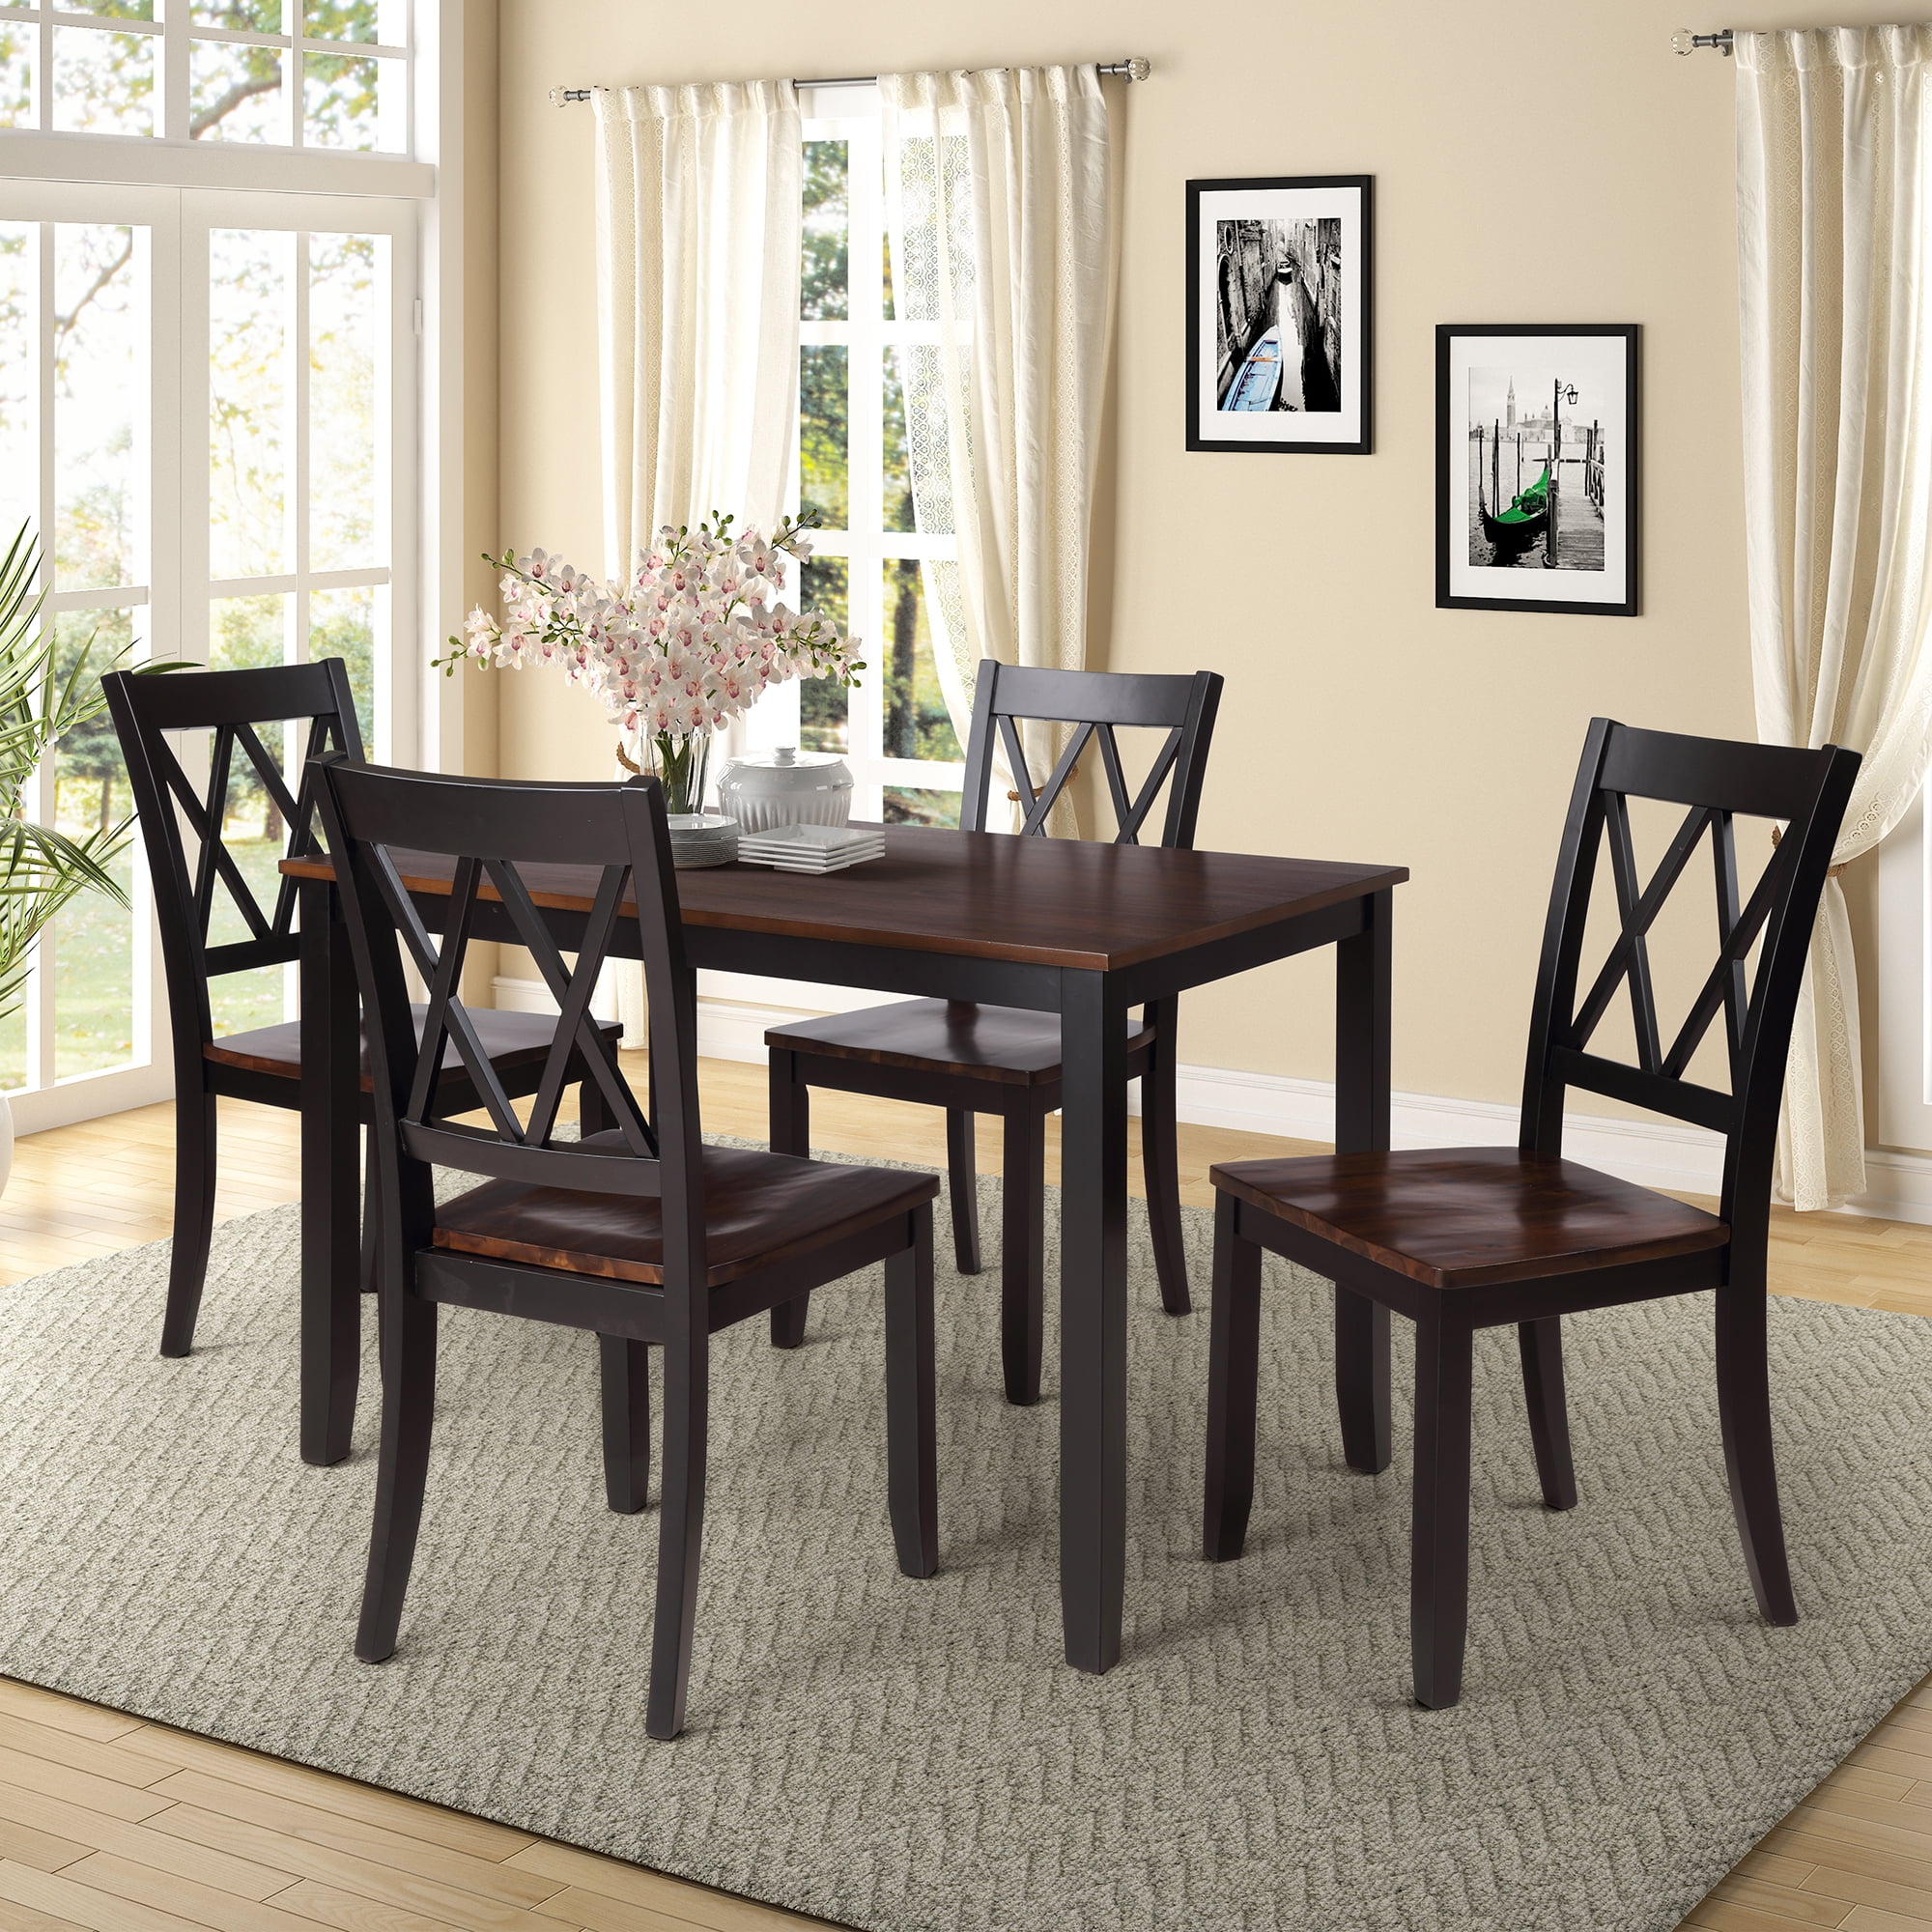 Chairs Wood Dining Set, Black Wood Kitchen Table And Chairs